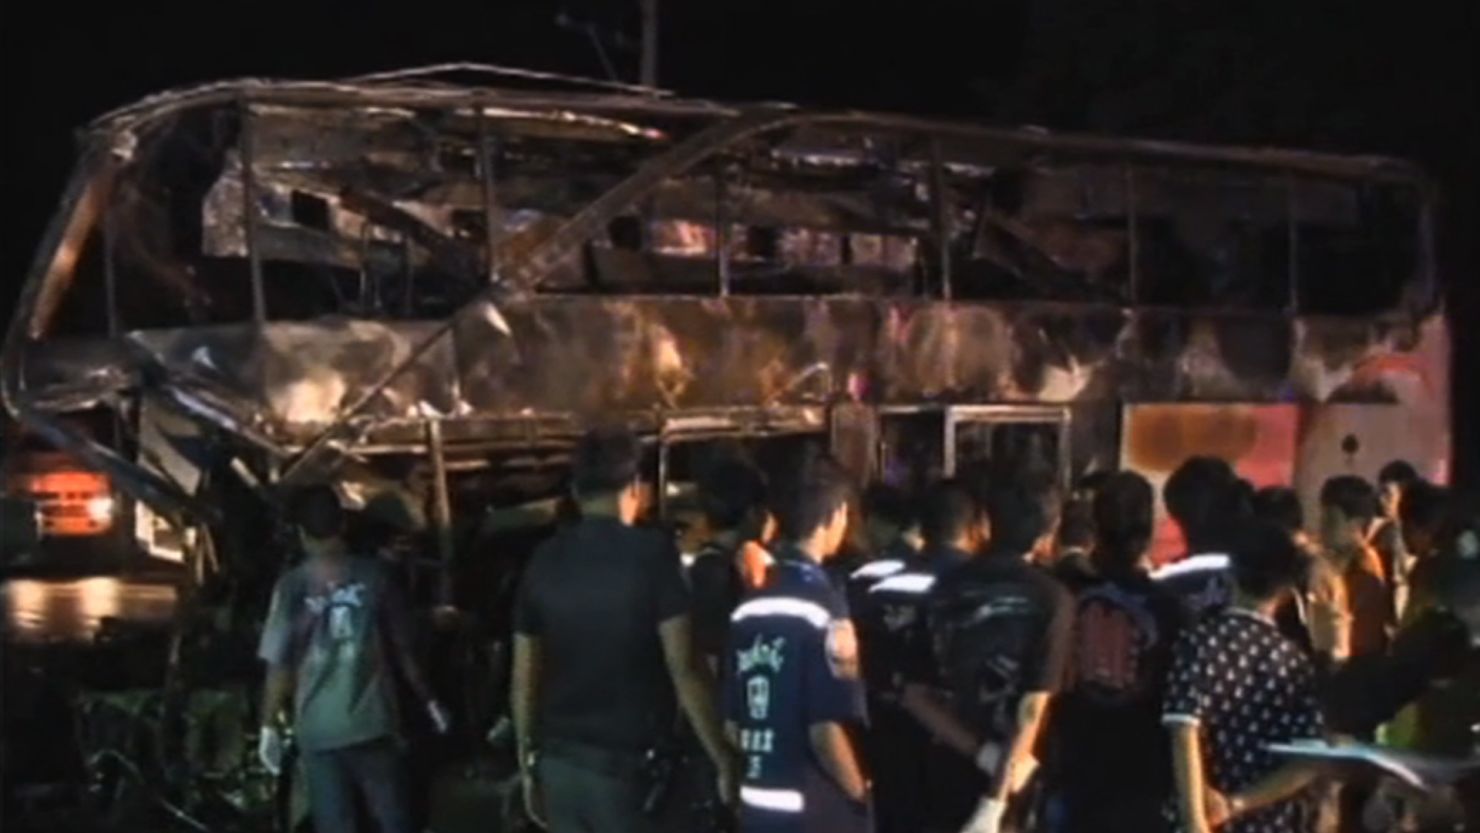 Charred remains of the ill-fated bus that crashed in central Thailand on Tuesday.